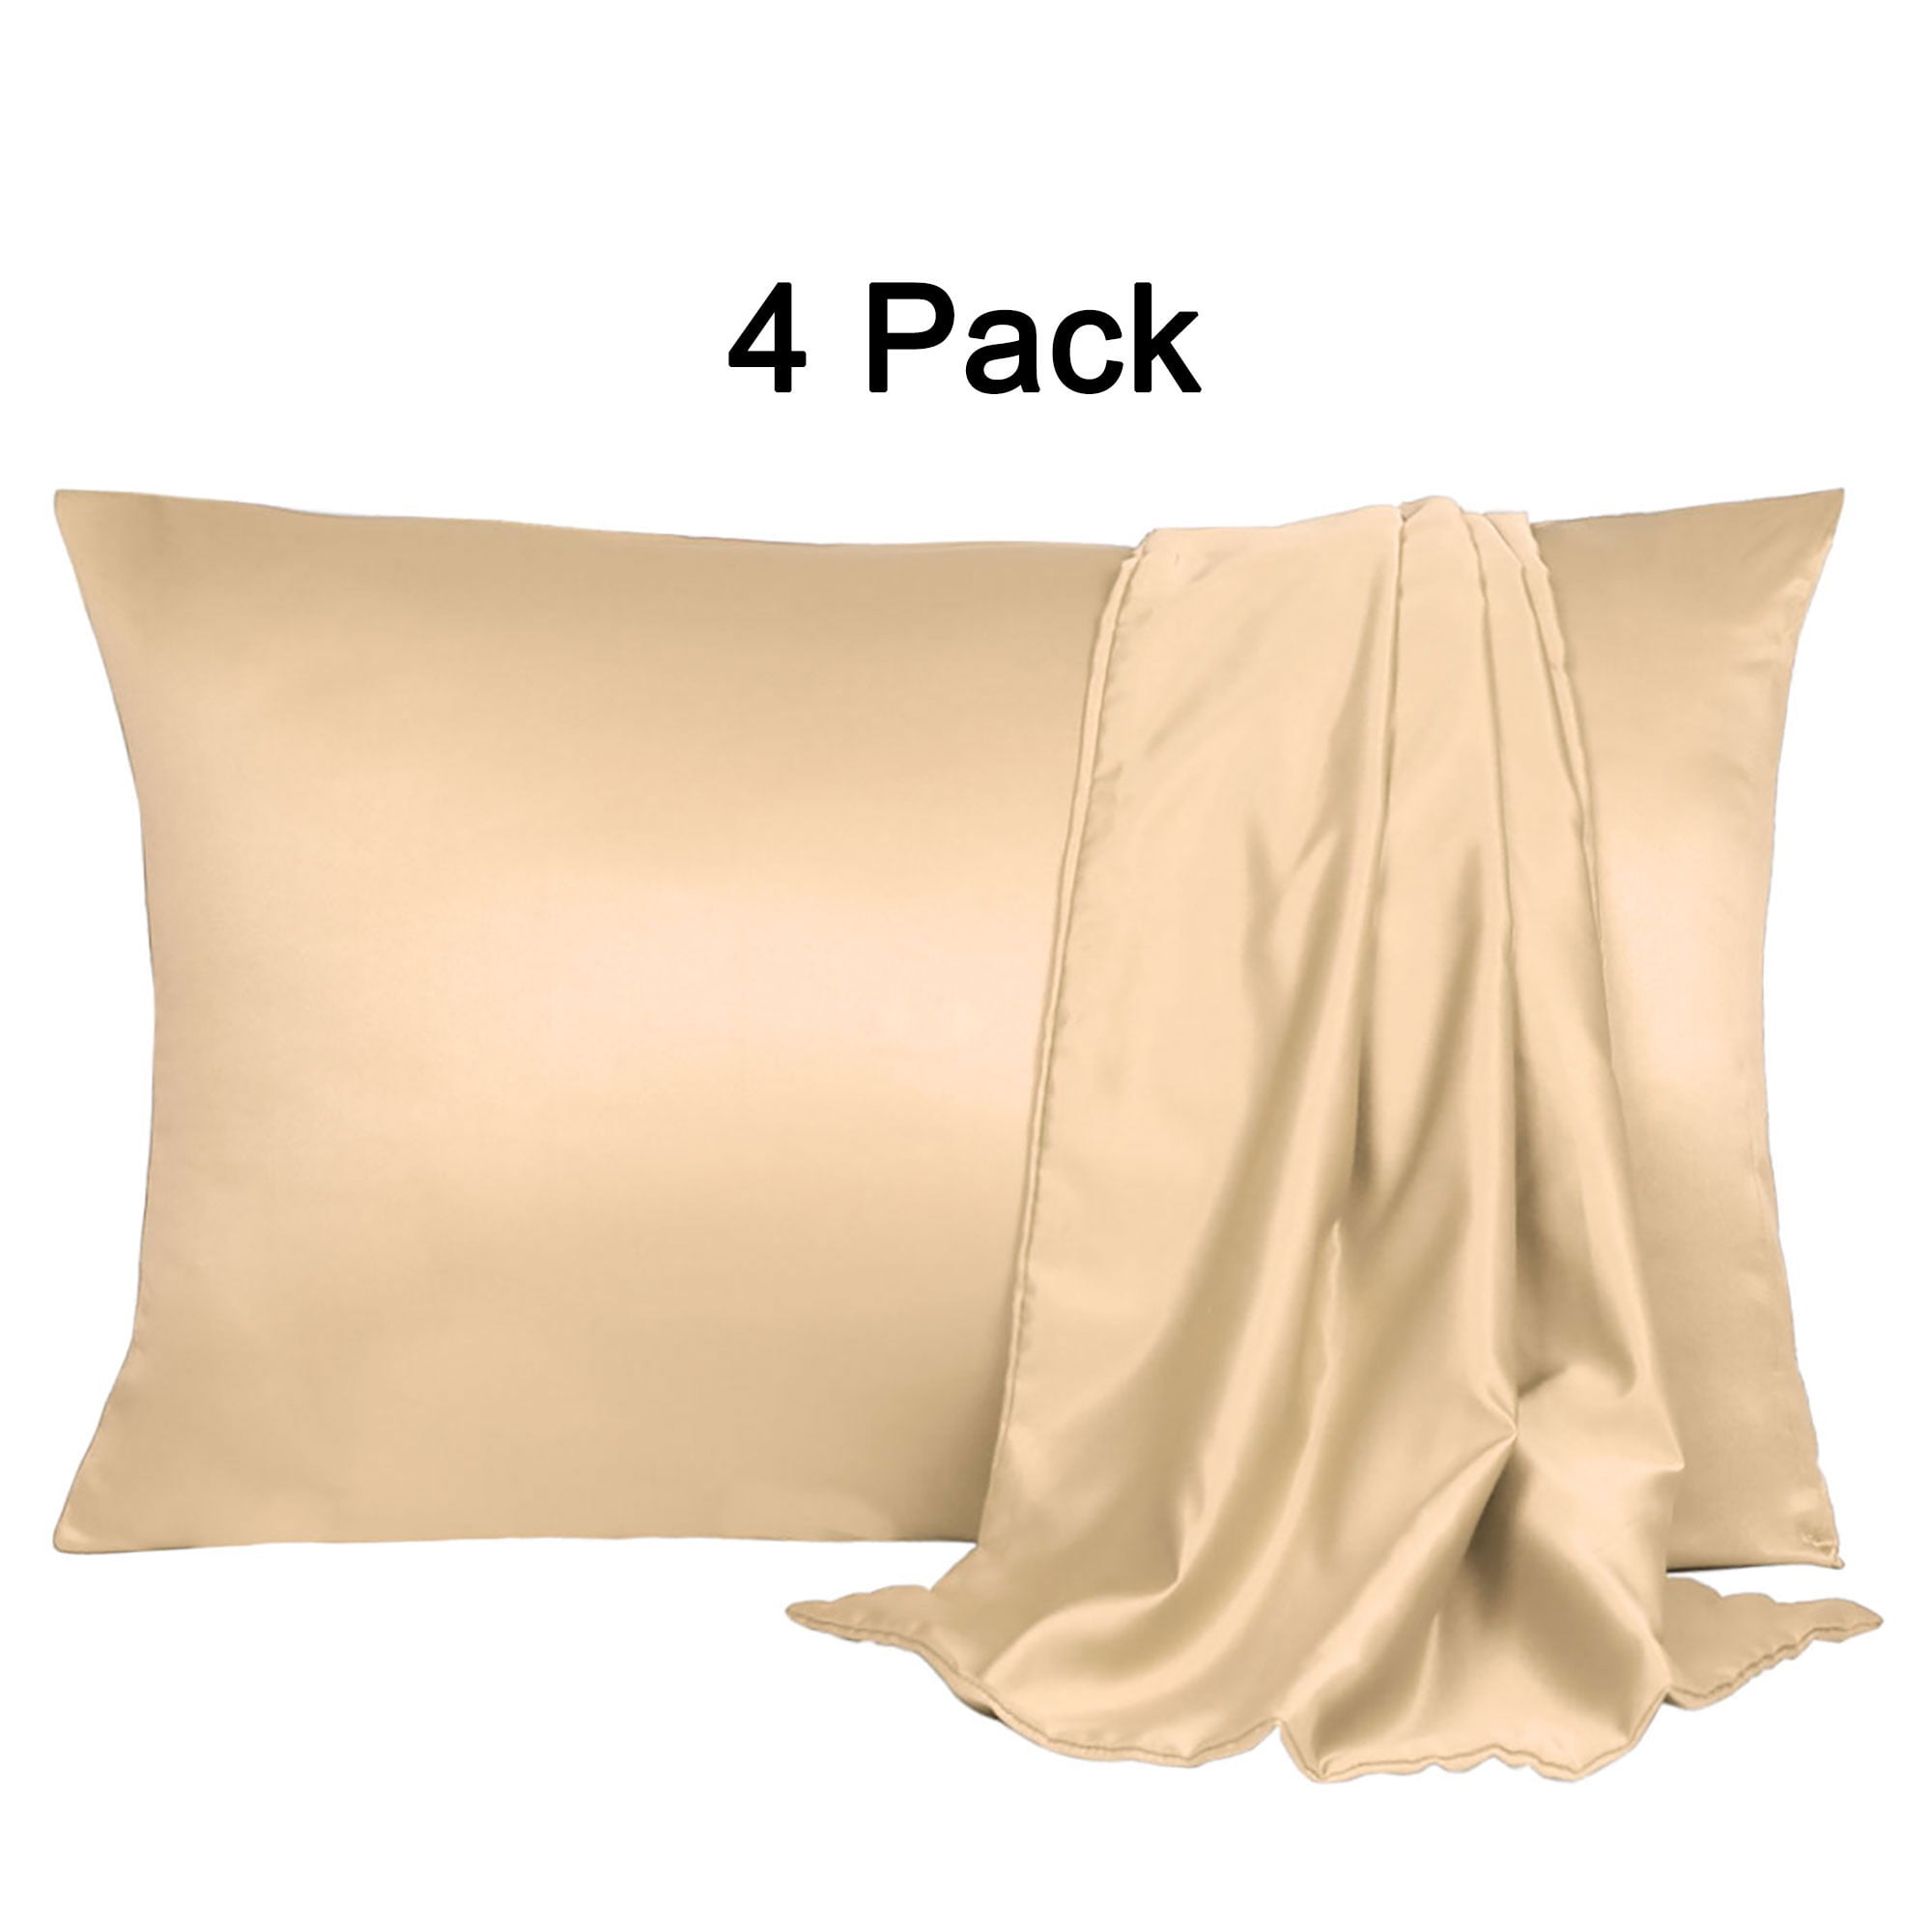 Details about   Satin Silk Body Pillowcase Pillow Case Cover Luxury Smooth Cooling Size 20"x54 